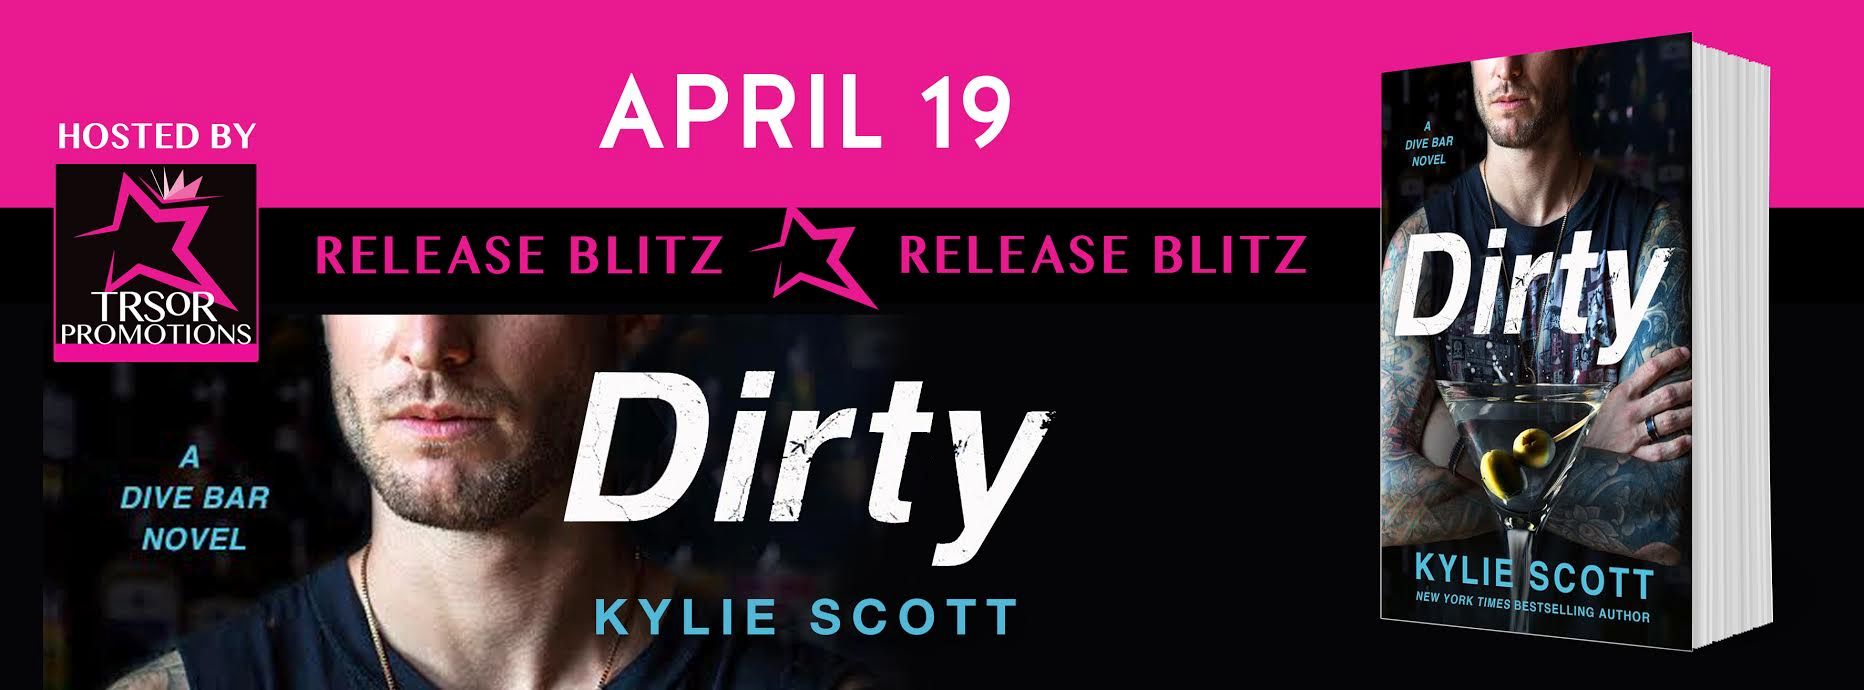 Dirty by Kylie Scott is LIVE!!!!